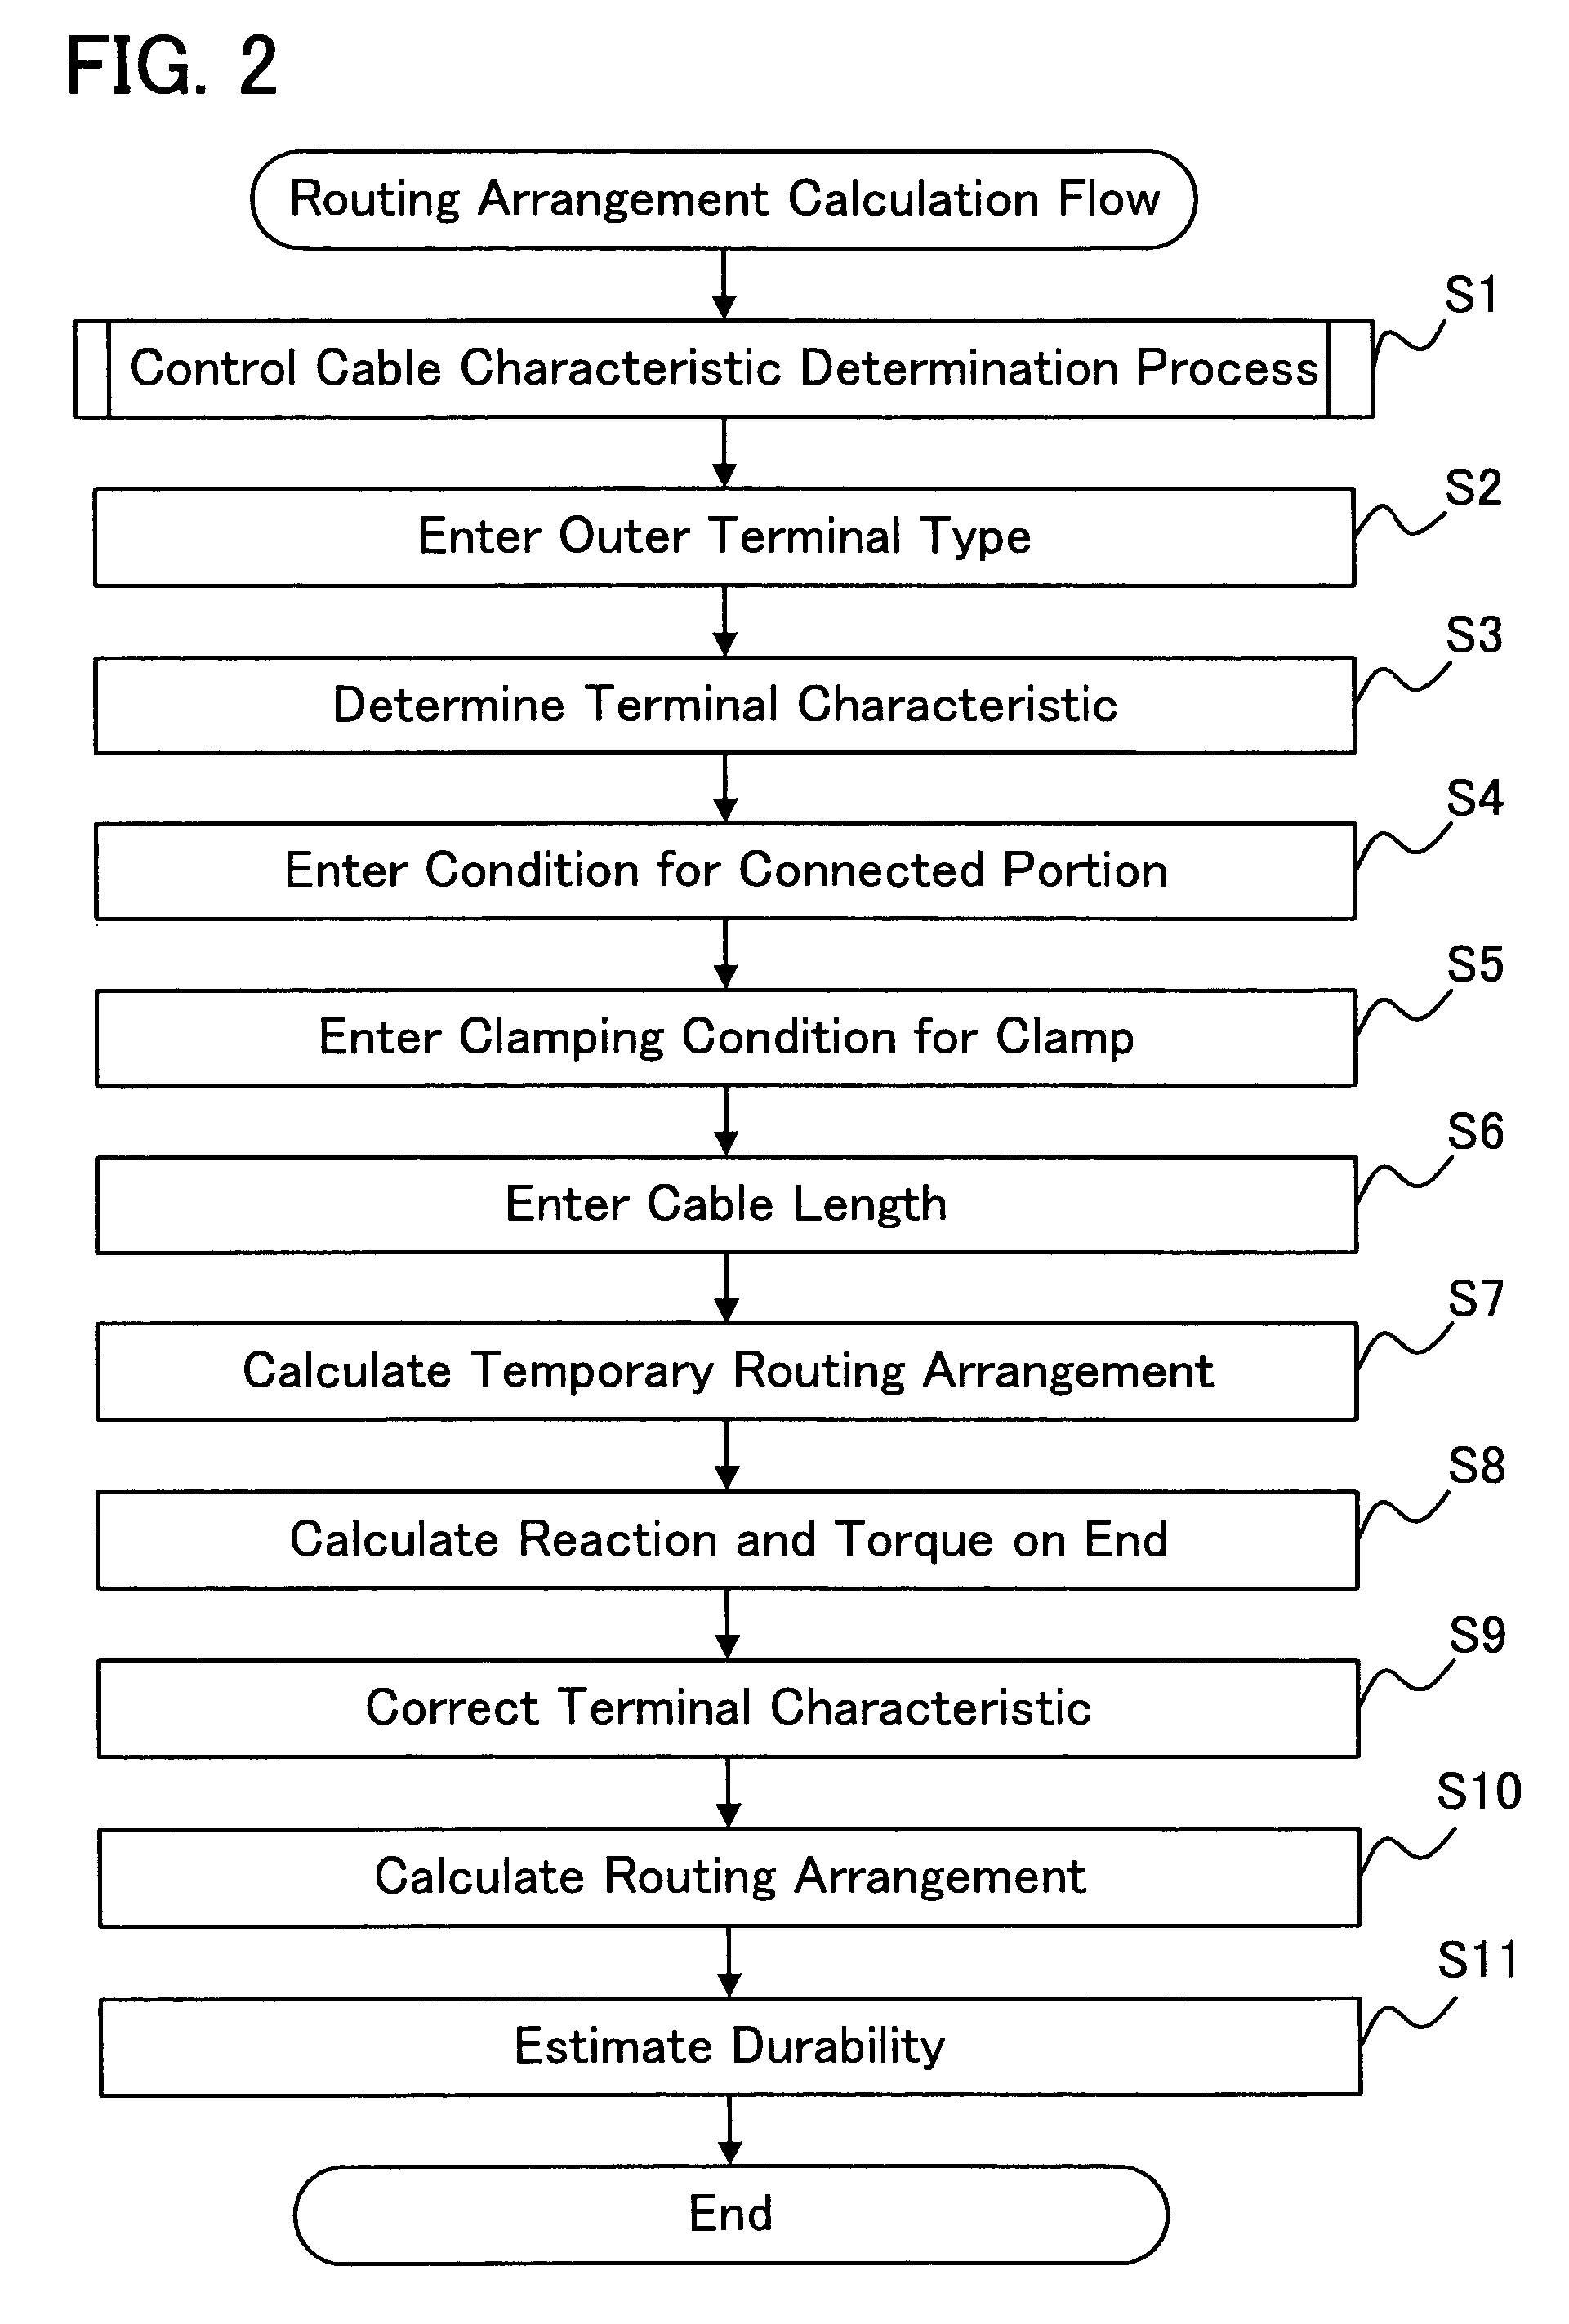 Methods and apparatus for calculating routing arrangements for control cables